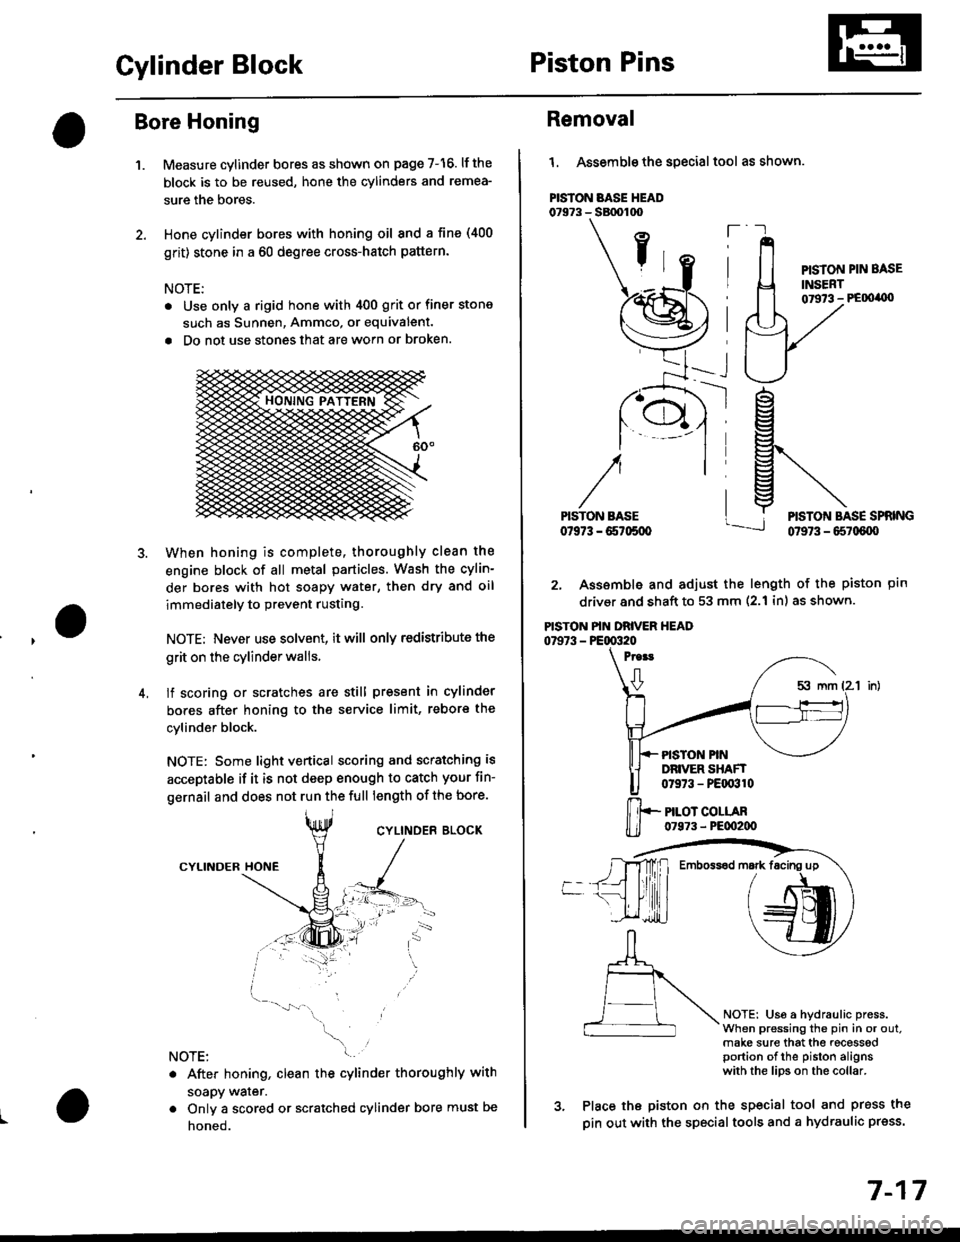 HONDA CIVIC 1997 6.G Workshop Manual Cylinder BlockPiston Pins
Bore Honing
1.Measure cylinder bores as shown on page 7-16. lf the
block is to be reused, hone the cylinders and remea-
sure the bores.
Hone cylinder bores with honing oil 8n